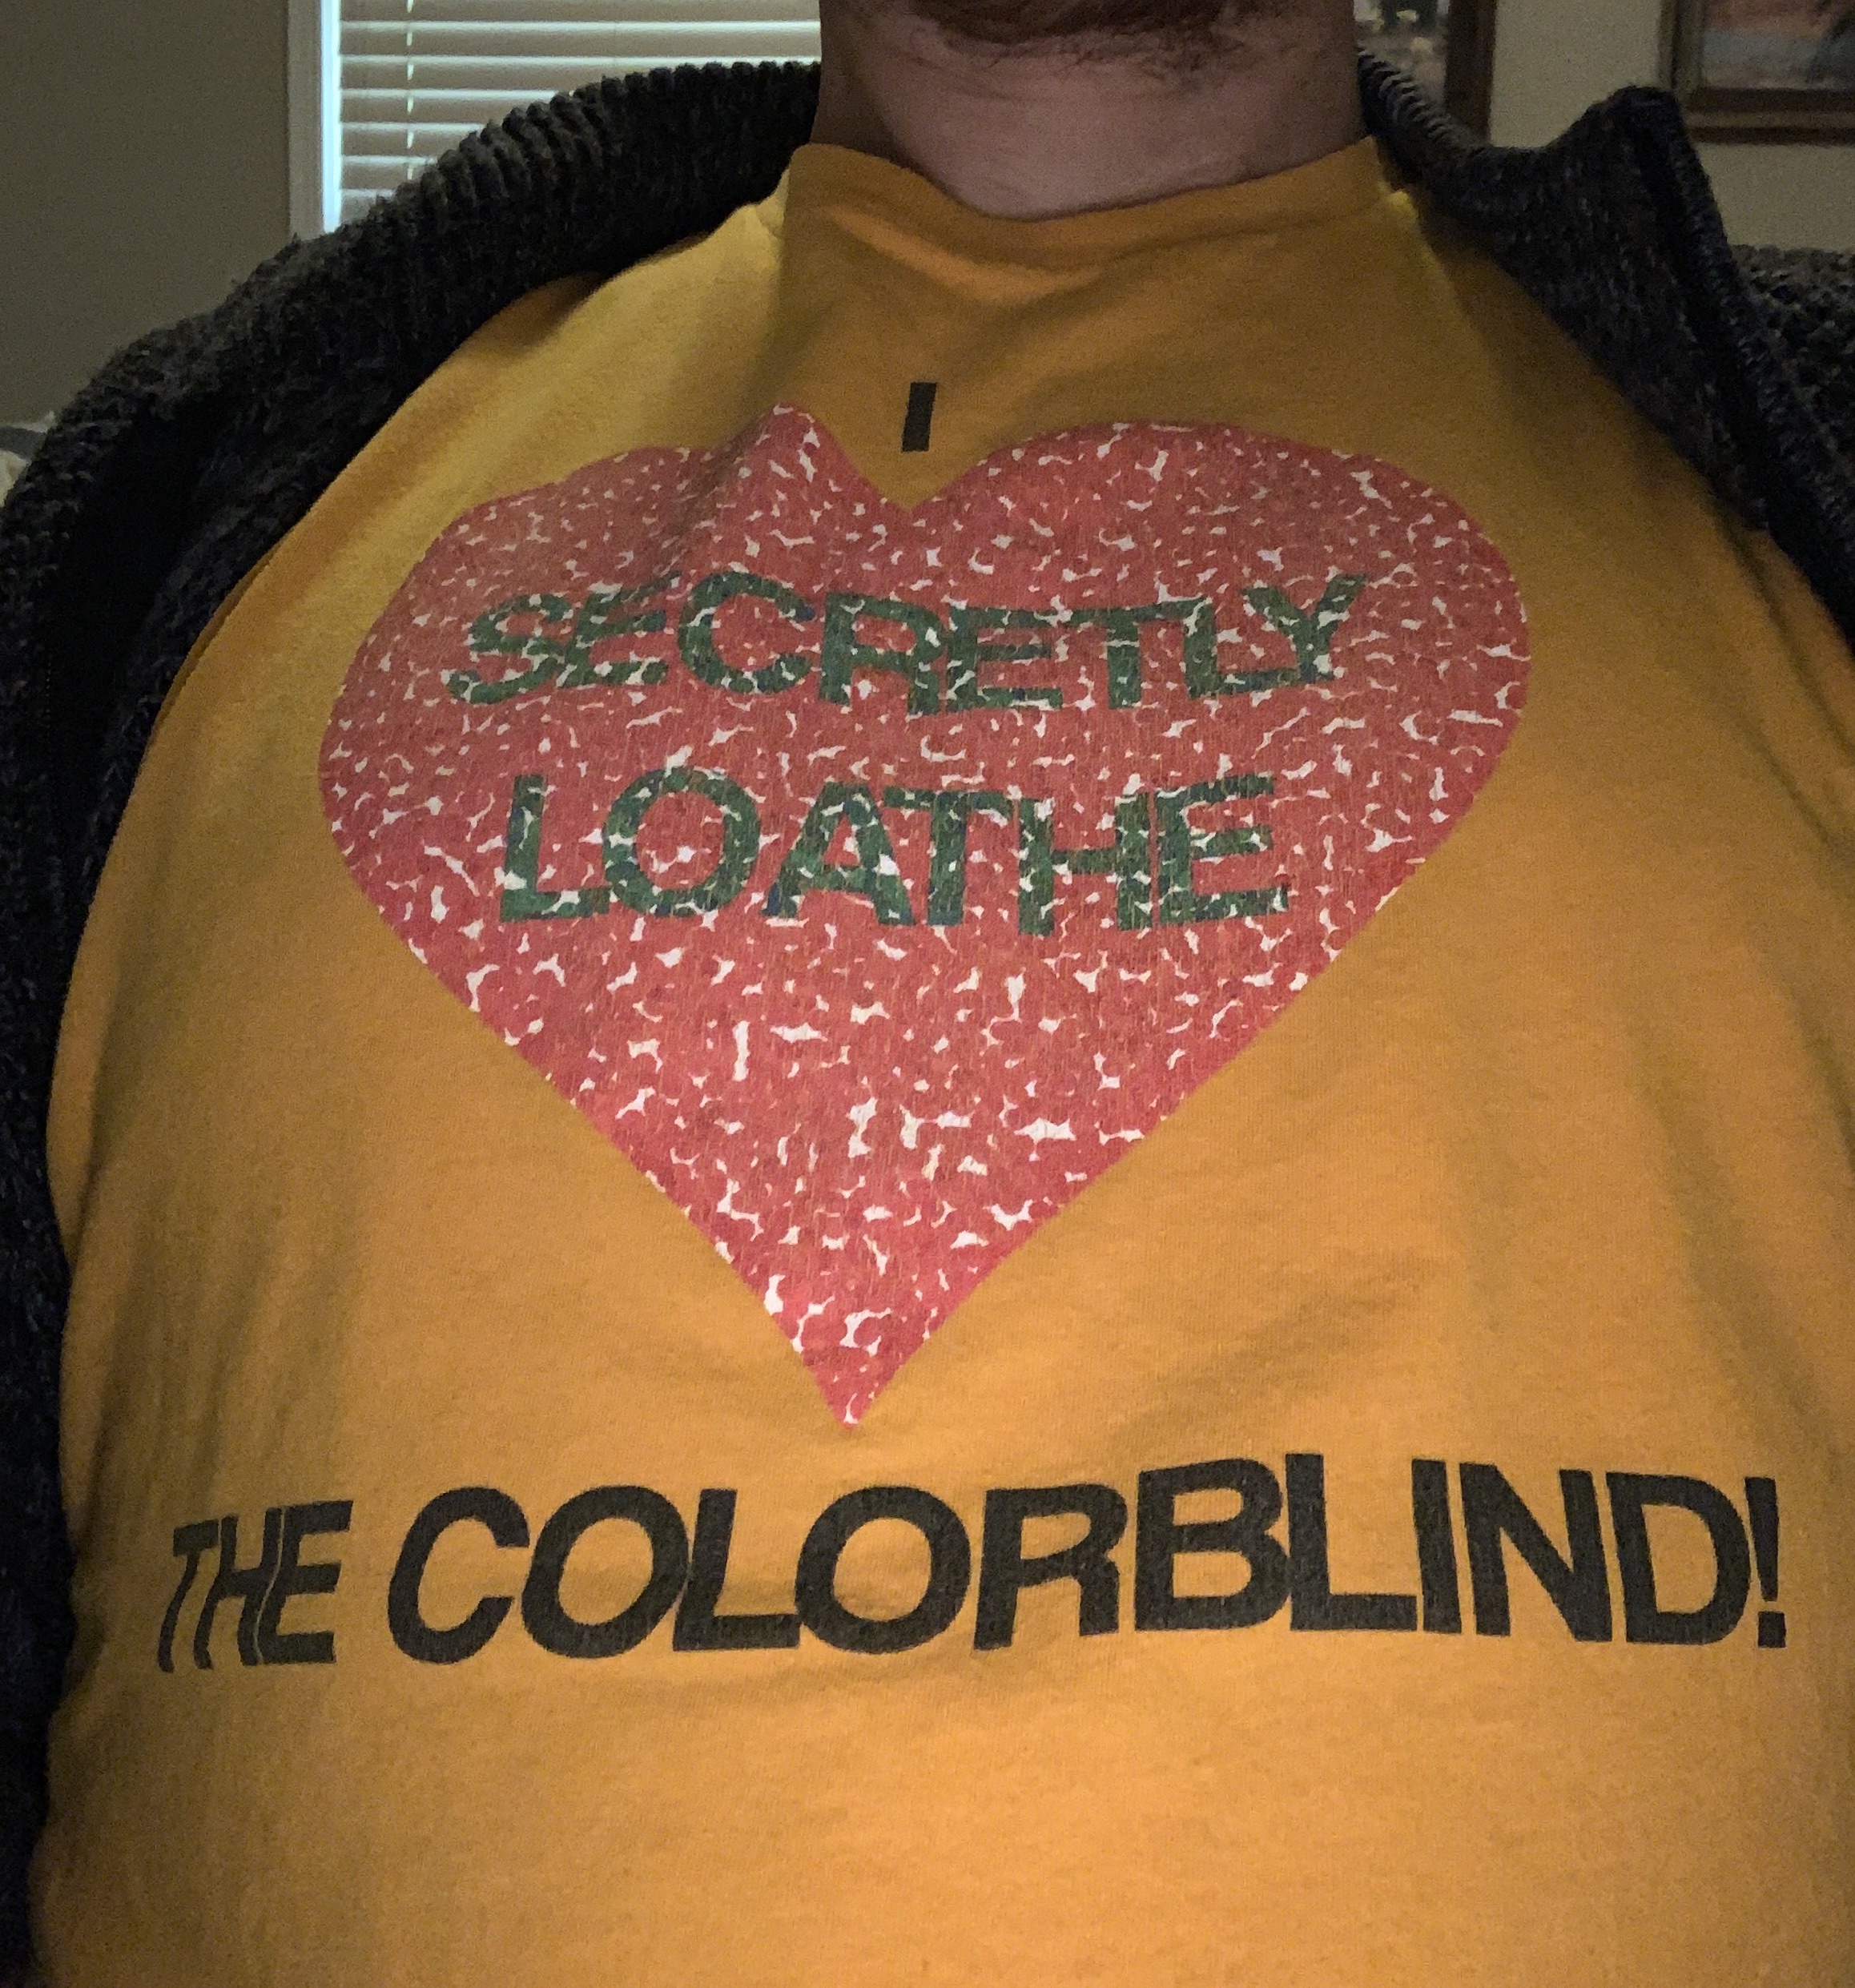 I love the colorblind?